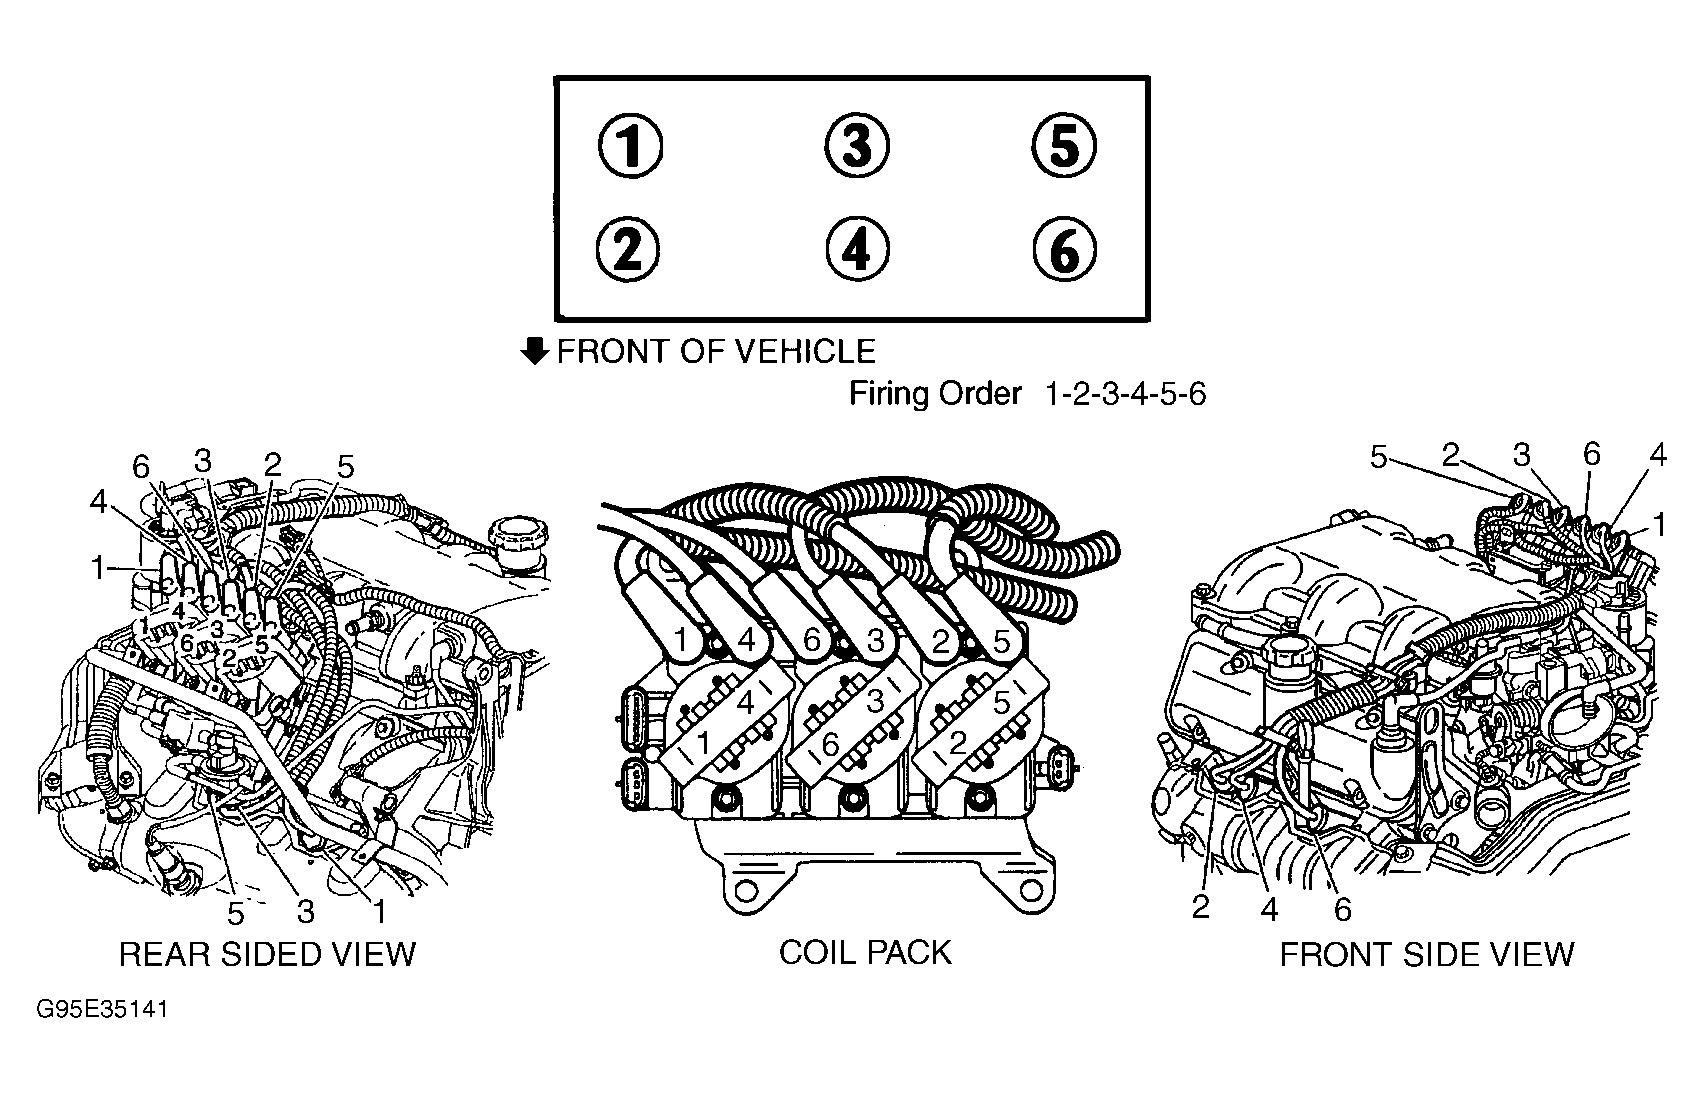 Diagram For Spark Plug Wires Gooddy Org With Wiring